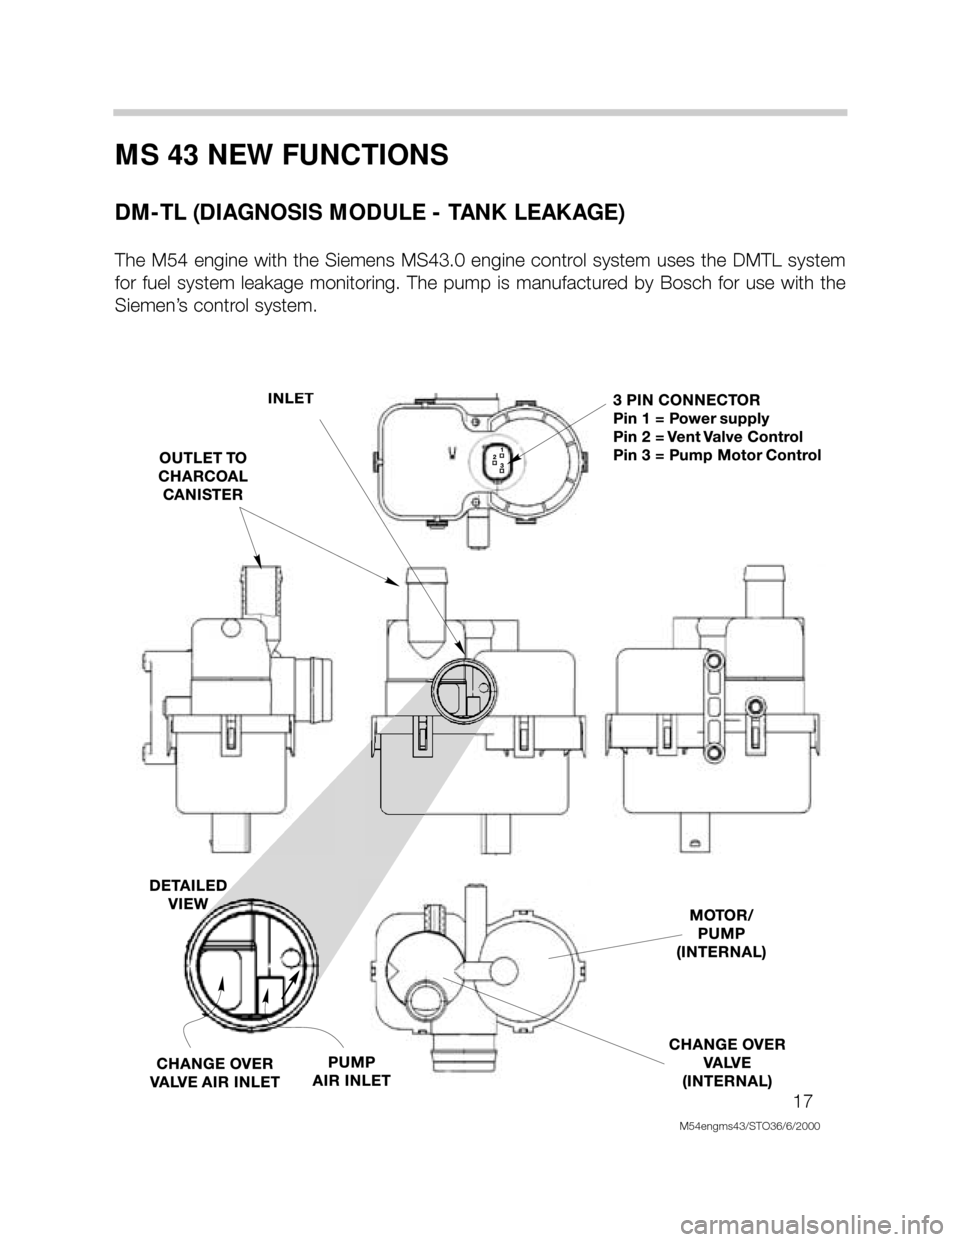 BMW X5 2001 E53 M54 Engine Workshop Manual 17
M54engms43/STO36/6/2000
MS 43 NEW FUNCTIONS
DM-TL (DIAGNOSIS MODULE - TANK LEAKAGE)
The  M54  engine  with  the  Siemens  MS43.0  engine  control  system  uses  the  DMTL  system
for  fuel  system 